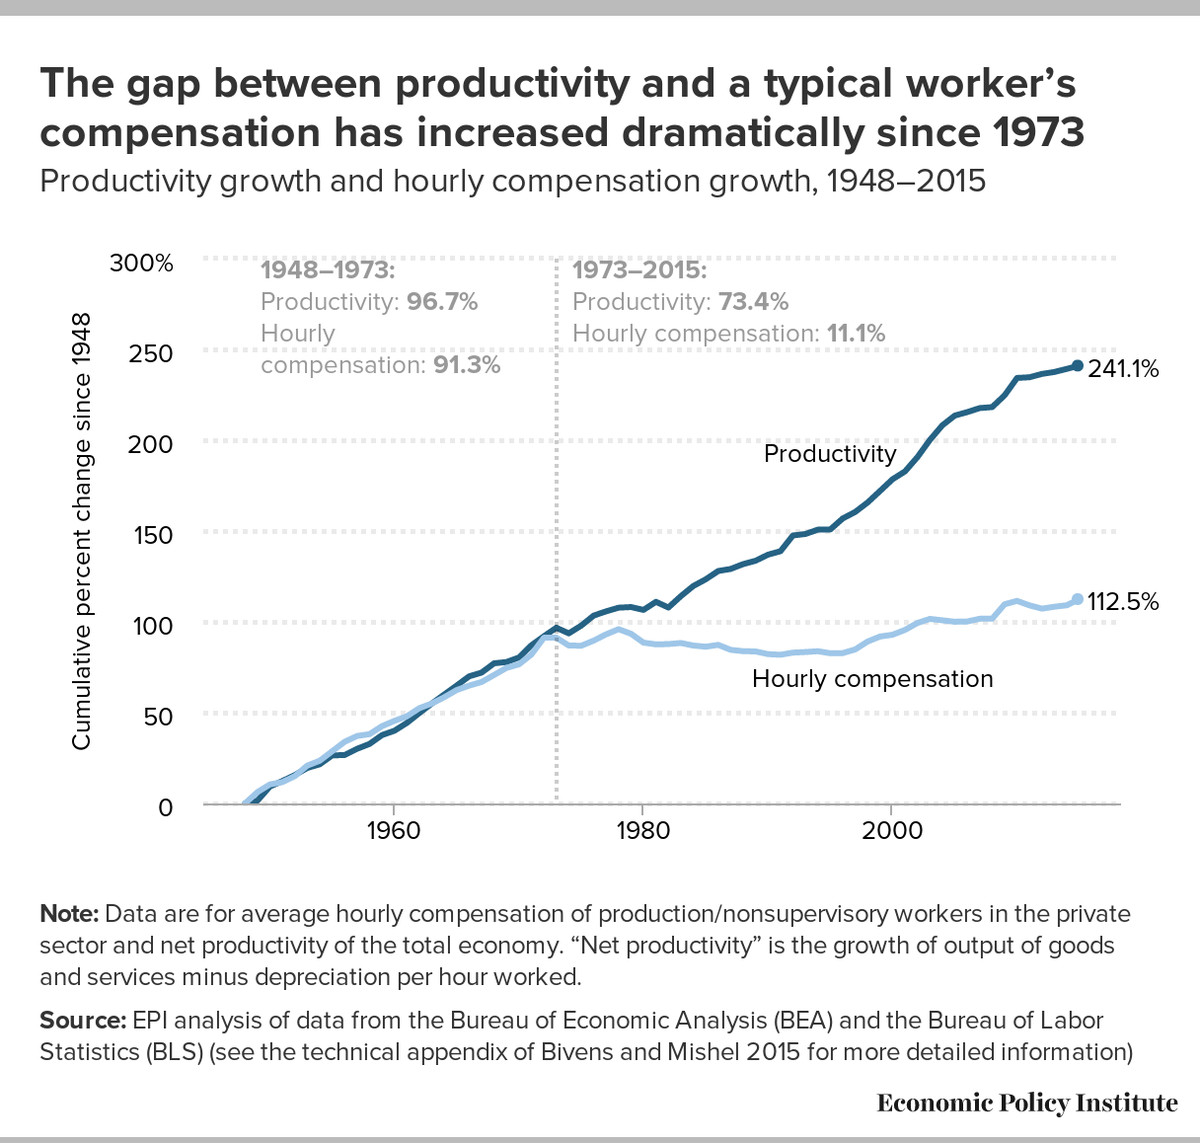 The gap between productivity and compensation